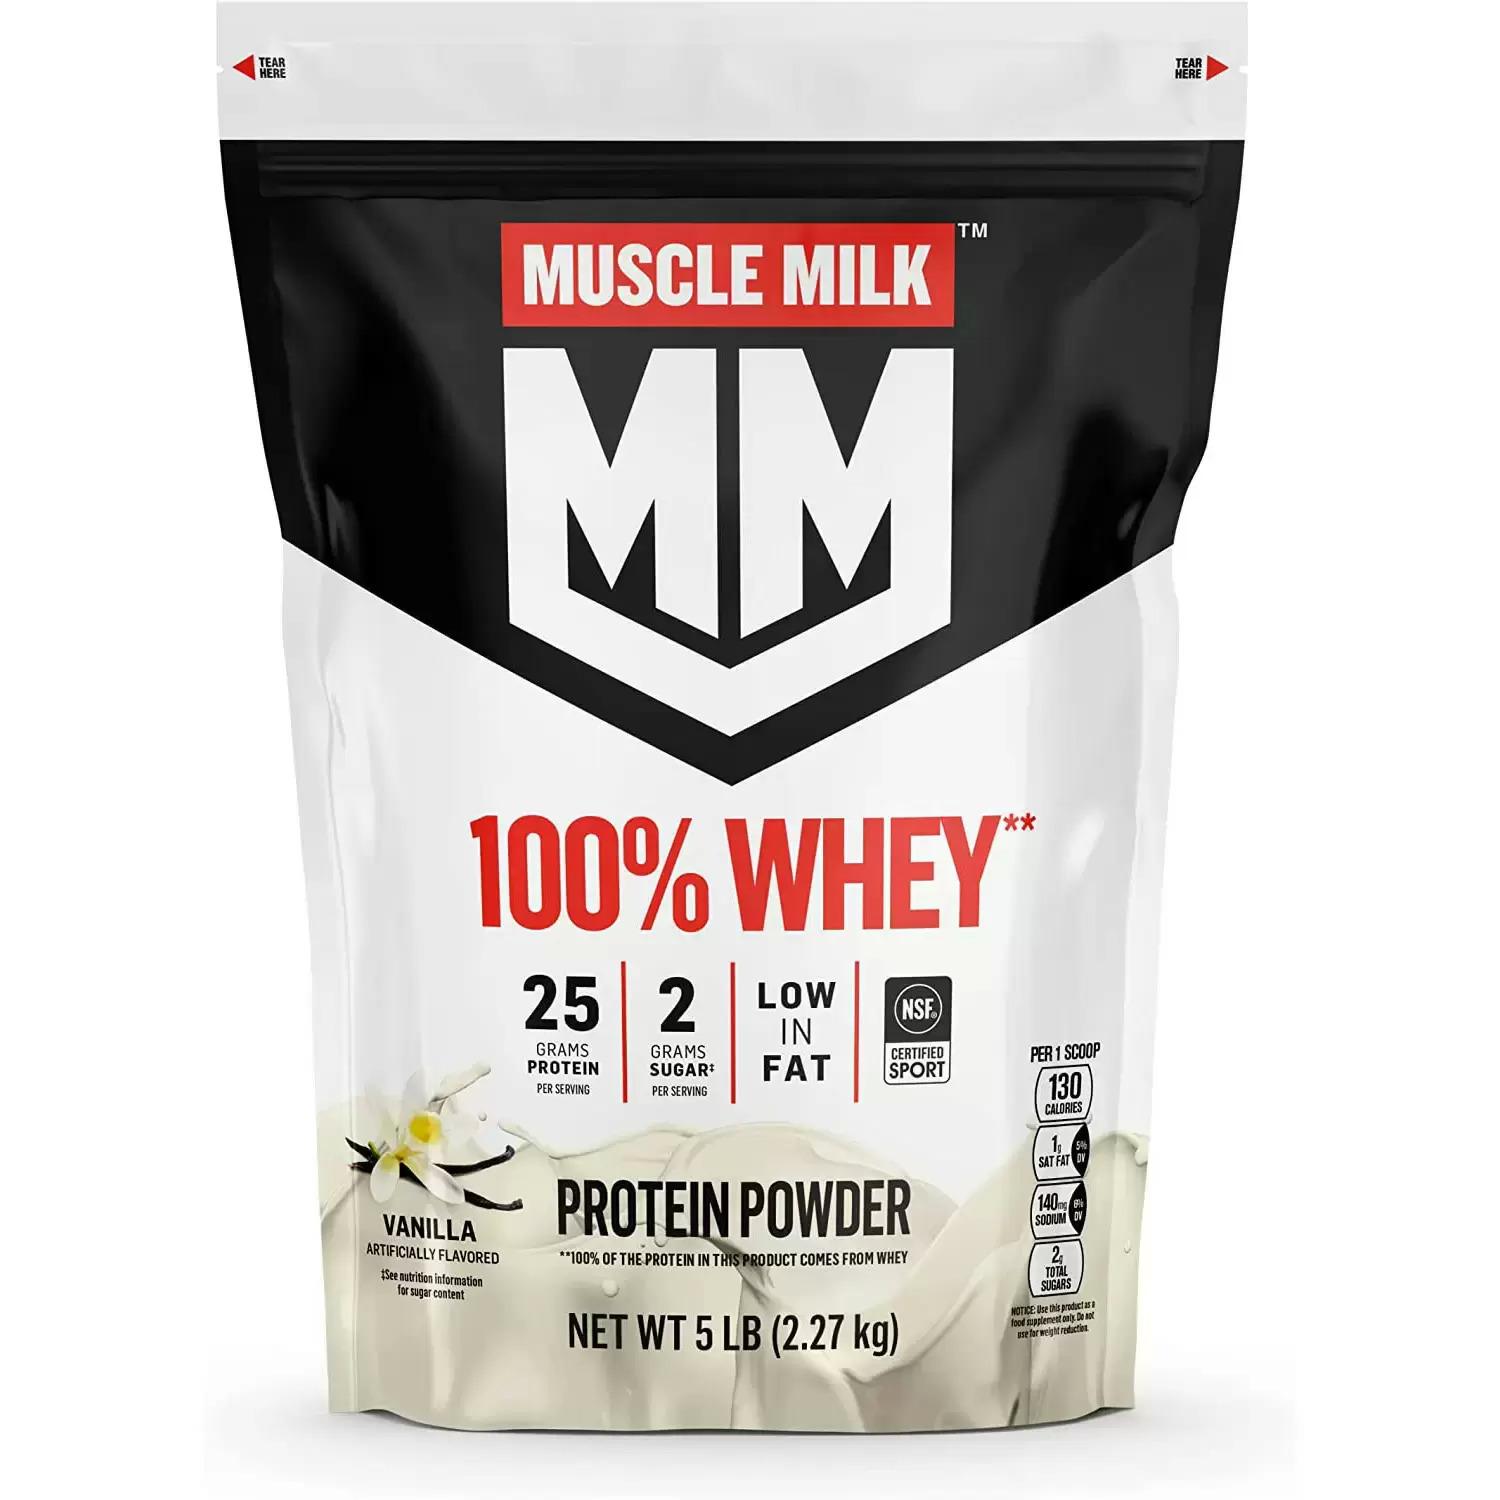 Muscle Milk 5Lbs Whey Protein Powder for $30.59 Shipped